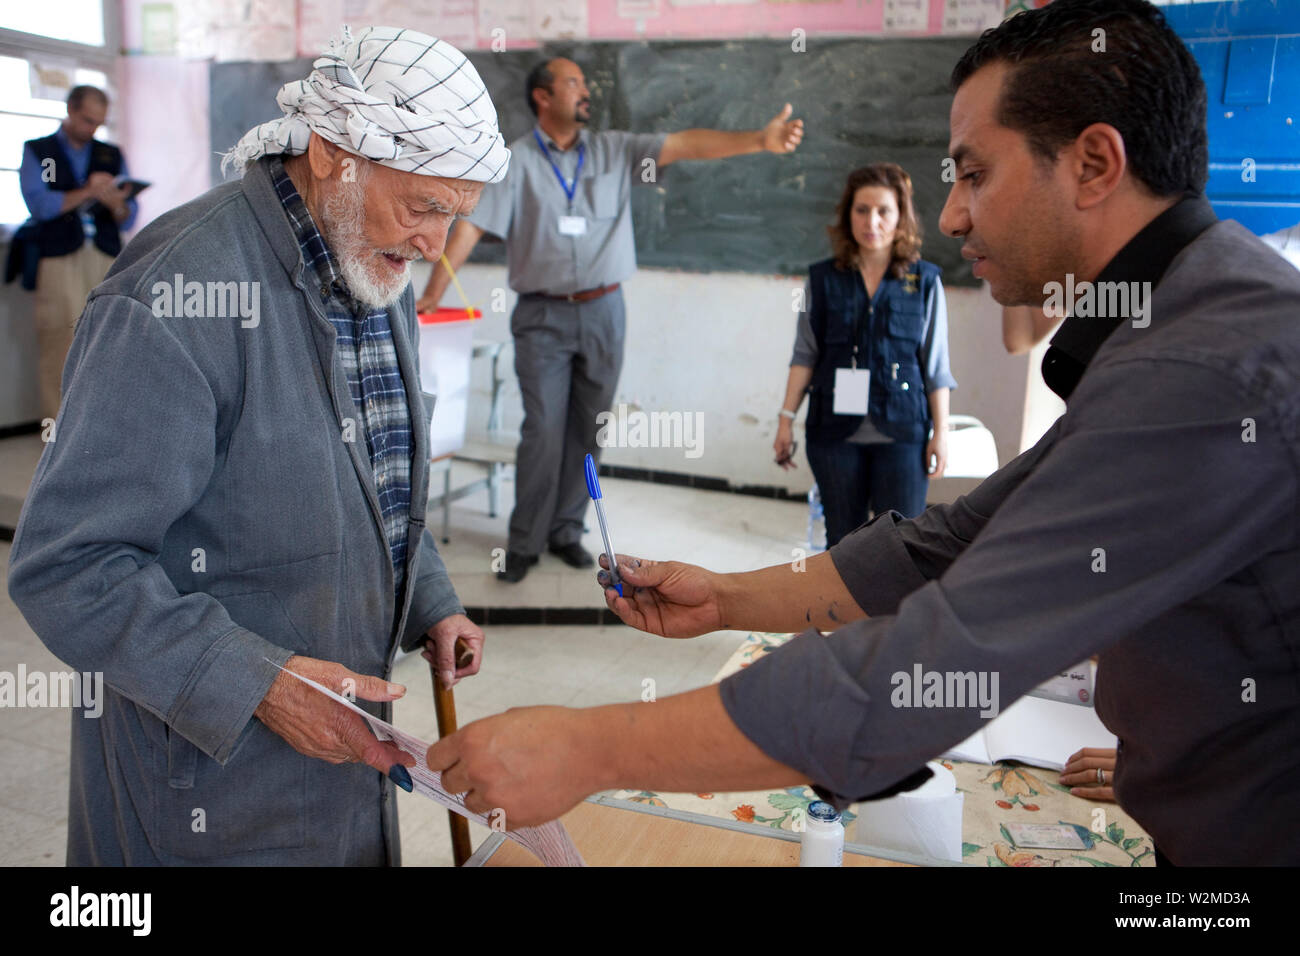 October 23, 2011 – Tunis, Tunisia – An observer woman from the EU Electoral Observation Mission in Tunisia, observes a Tunisian man casting his vote at a polling station during an election in Tunisia. Ten months since the uprising forced the resignation of President Zine el Abidine Ben Ali, 81 political parties, as well as hundreds of independent candidates, competed in the countries first free election. 217 candidates willl serve in the constituent assembly, which will rewrite the country’s constitution and appoint a new government. The election could set the template for other Arab countries Stock Photo